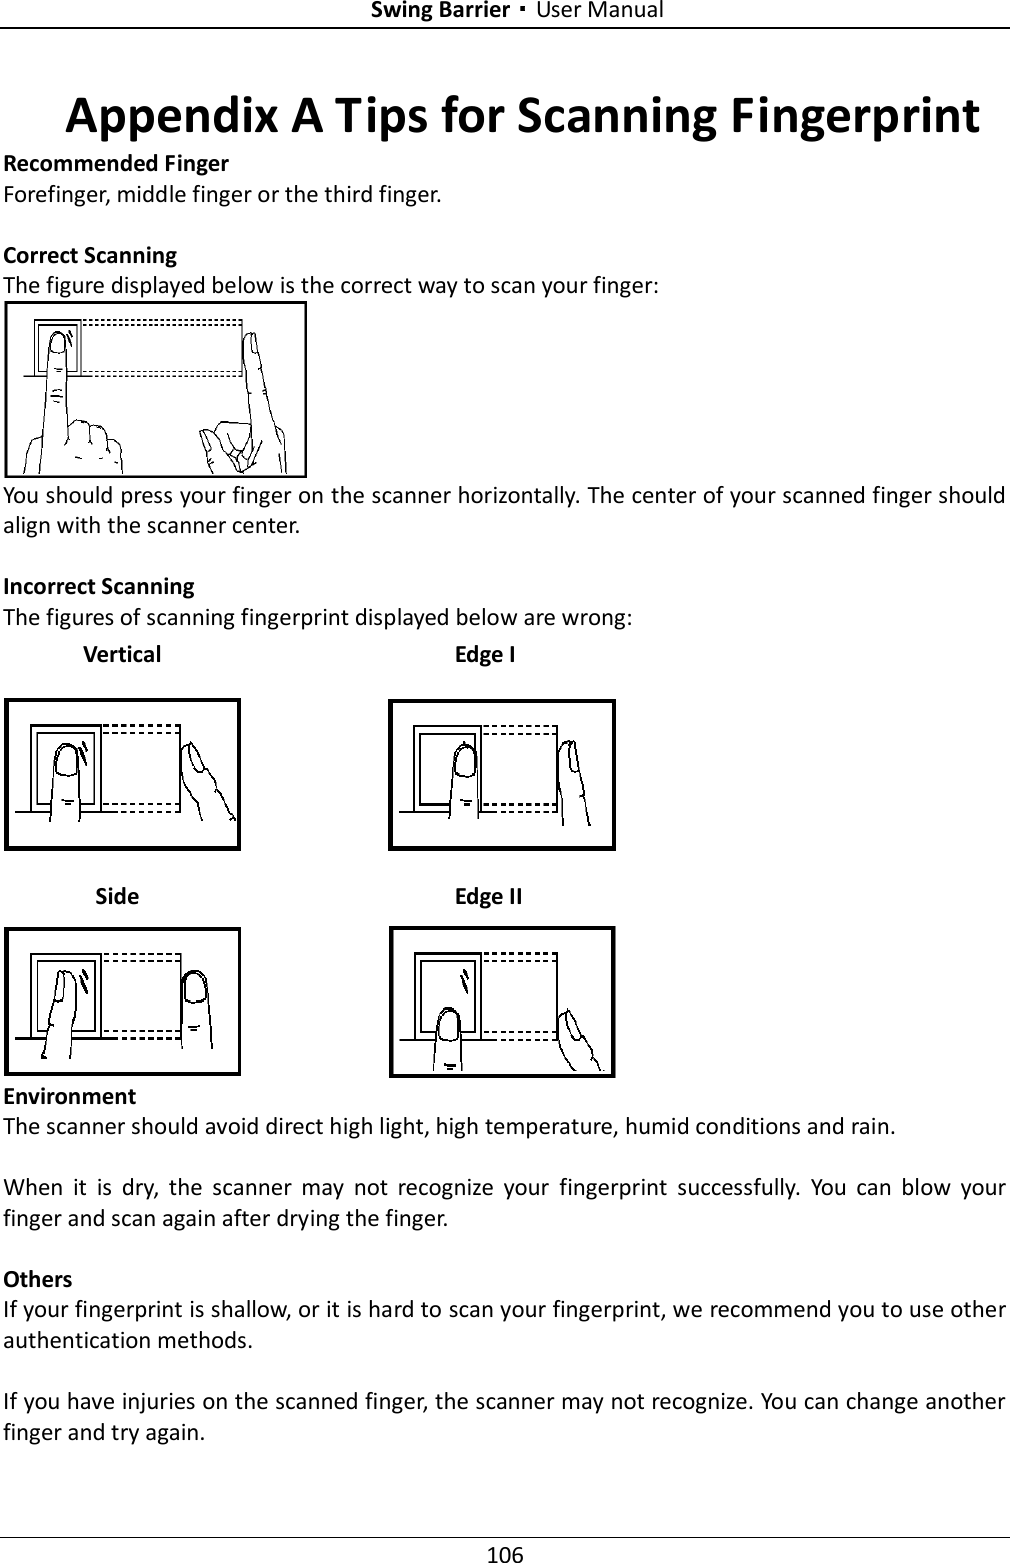 Swing Barrier·User Manual 106 Appendix A Tips for Scanning Fingerprint Recommended Finger Forefinger, middle finger or the third finger.  Correct Scanning The figure displayed below is the correct way to scan your finger:  You should press your finger on the scanner horizontally. The center of your scanned finger should align with the scanner center.  Incorrect Scanning The figures of scanning fingerprint displayed below are wrong:  Environment The scanner should avoid direct high light, high temperature, humid conditions and rain.    When  it  is  dry,  the  scanner  may  not  recognize  your  fingerprint  successfully.  You  can  blow  your finger and scan again after drying the finger.  Others If your fingerprint is shallow, or it is hard to scan your fingerprint, we recommend you to use other authentication methods.  If you have injuries on the scanned finger, the scanner may not recognize. You can change another finger and try again. Side  Edge II Vertical Edge I 